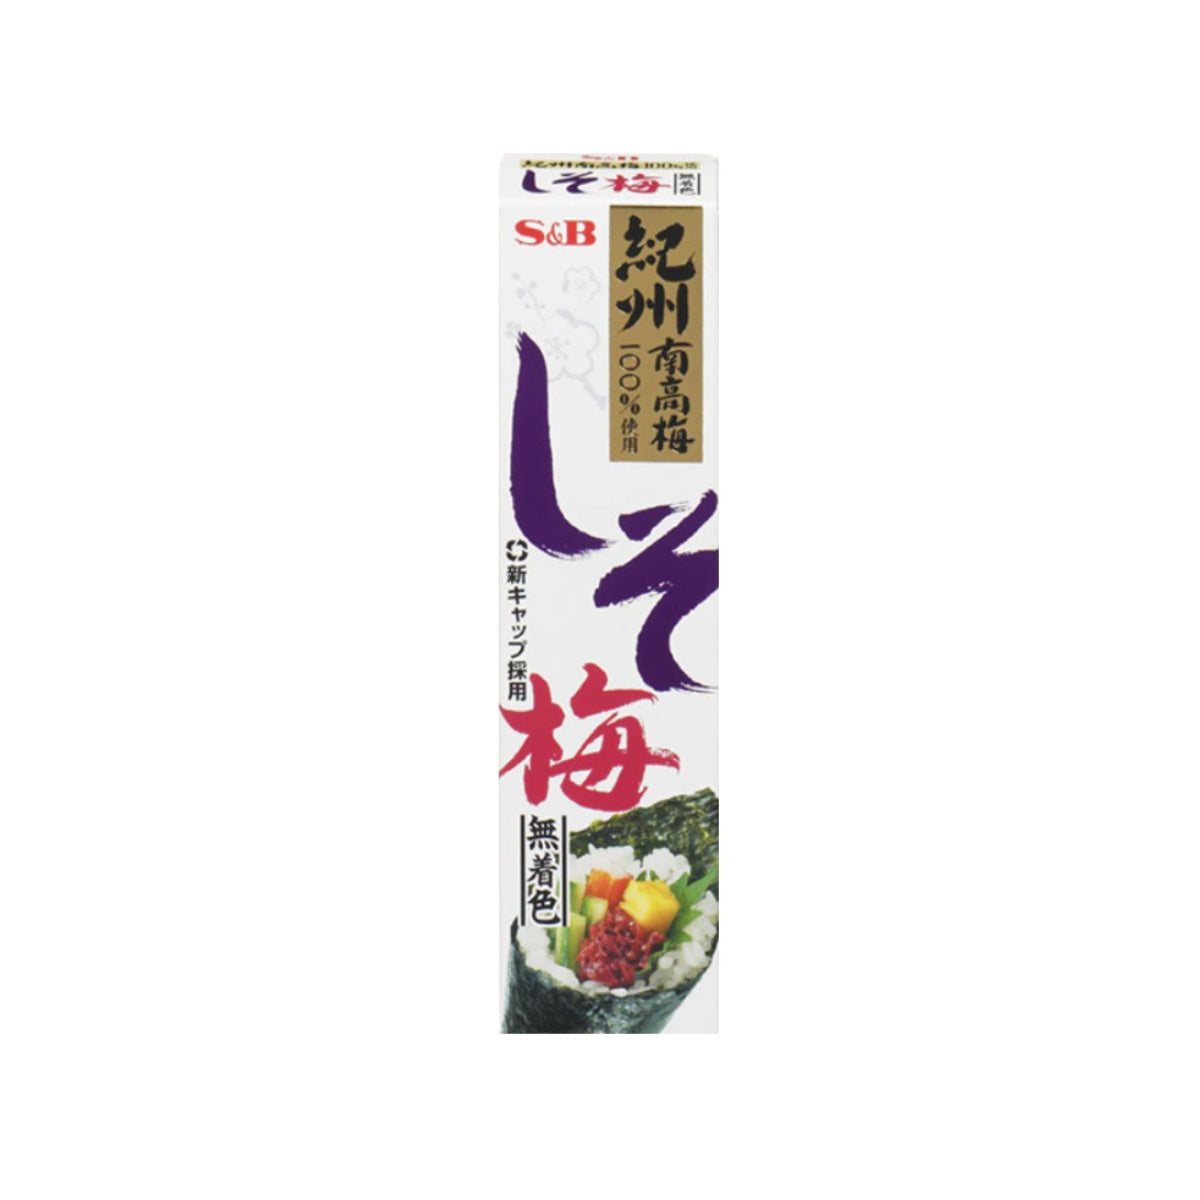 S&B Ume Paste with Shiso 40g